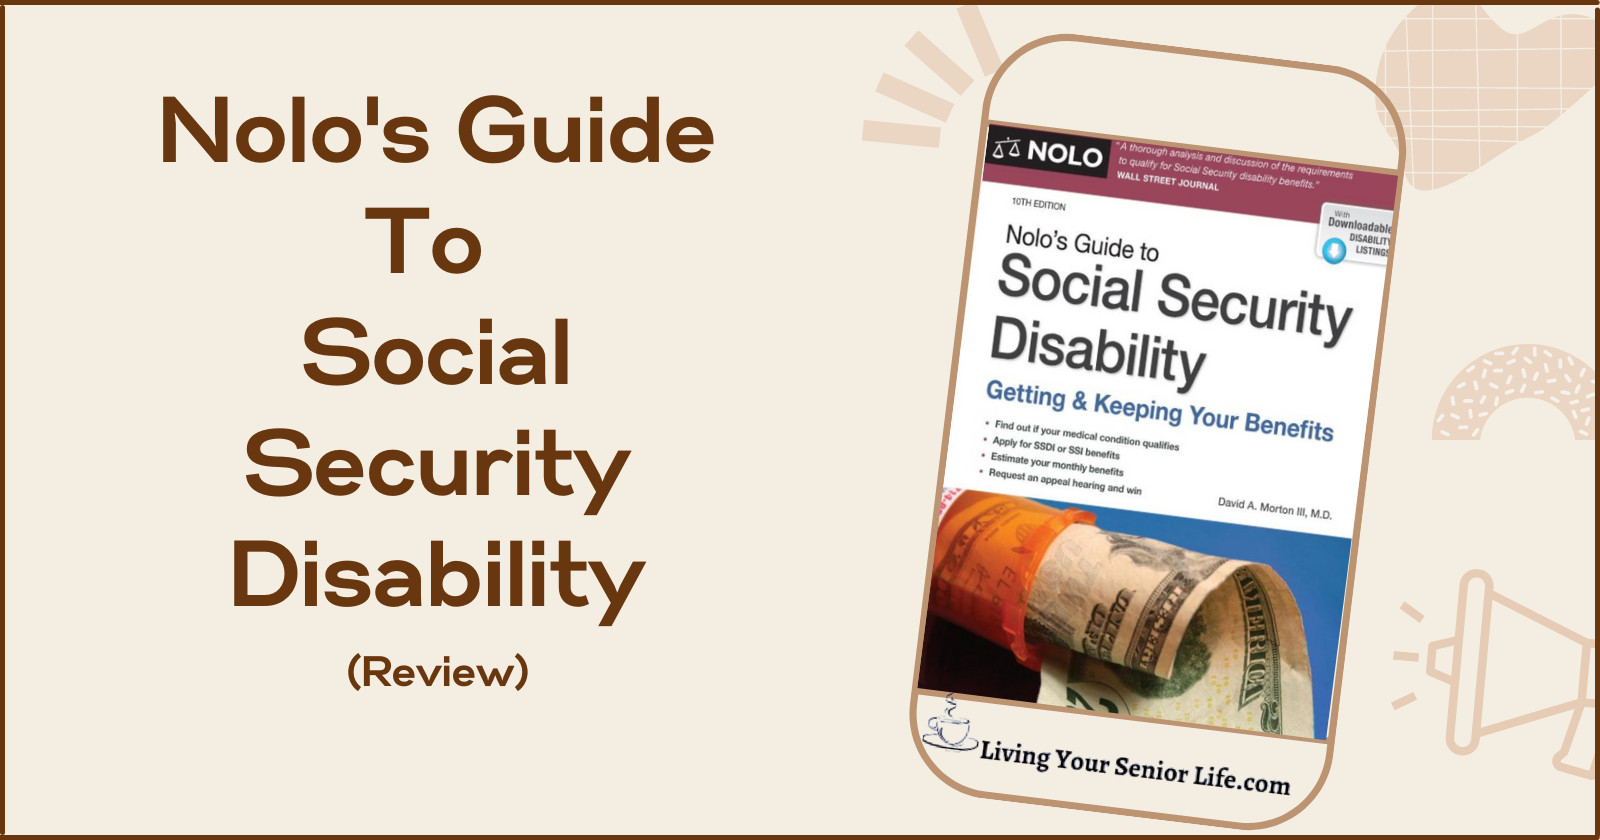 Nolo's Guide To Social Security Disability